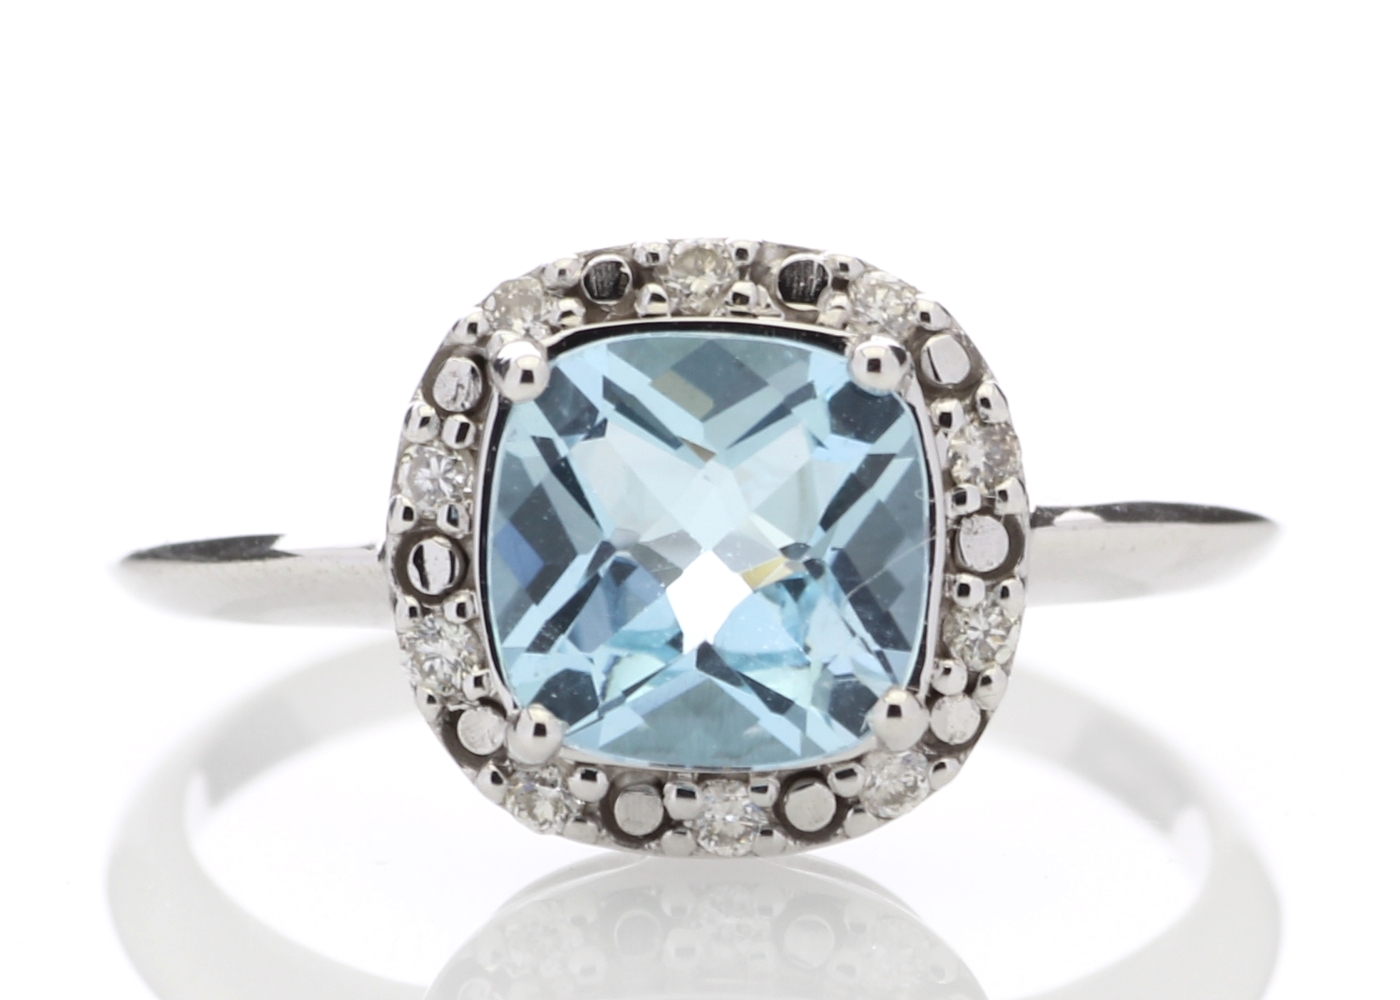 9ct White Gold Diamond And Blue Topaz Ring (BT1.79) 0.10 Carats - Valued By GIE £1,920.00 - A